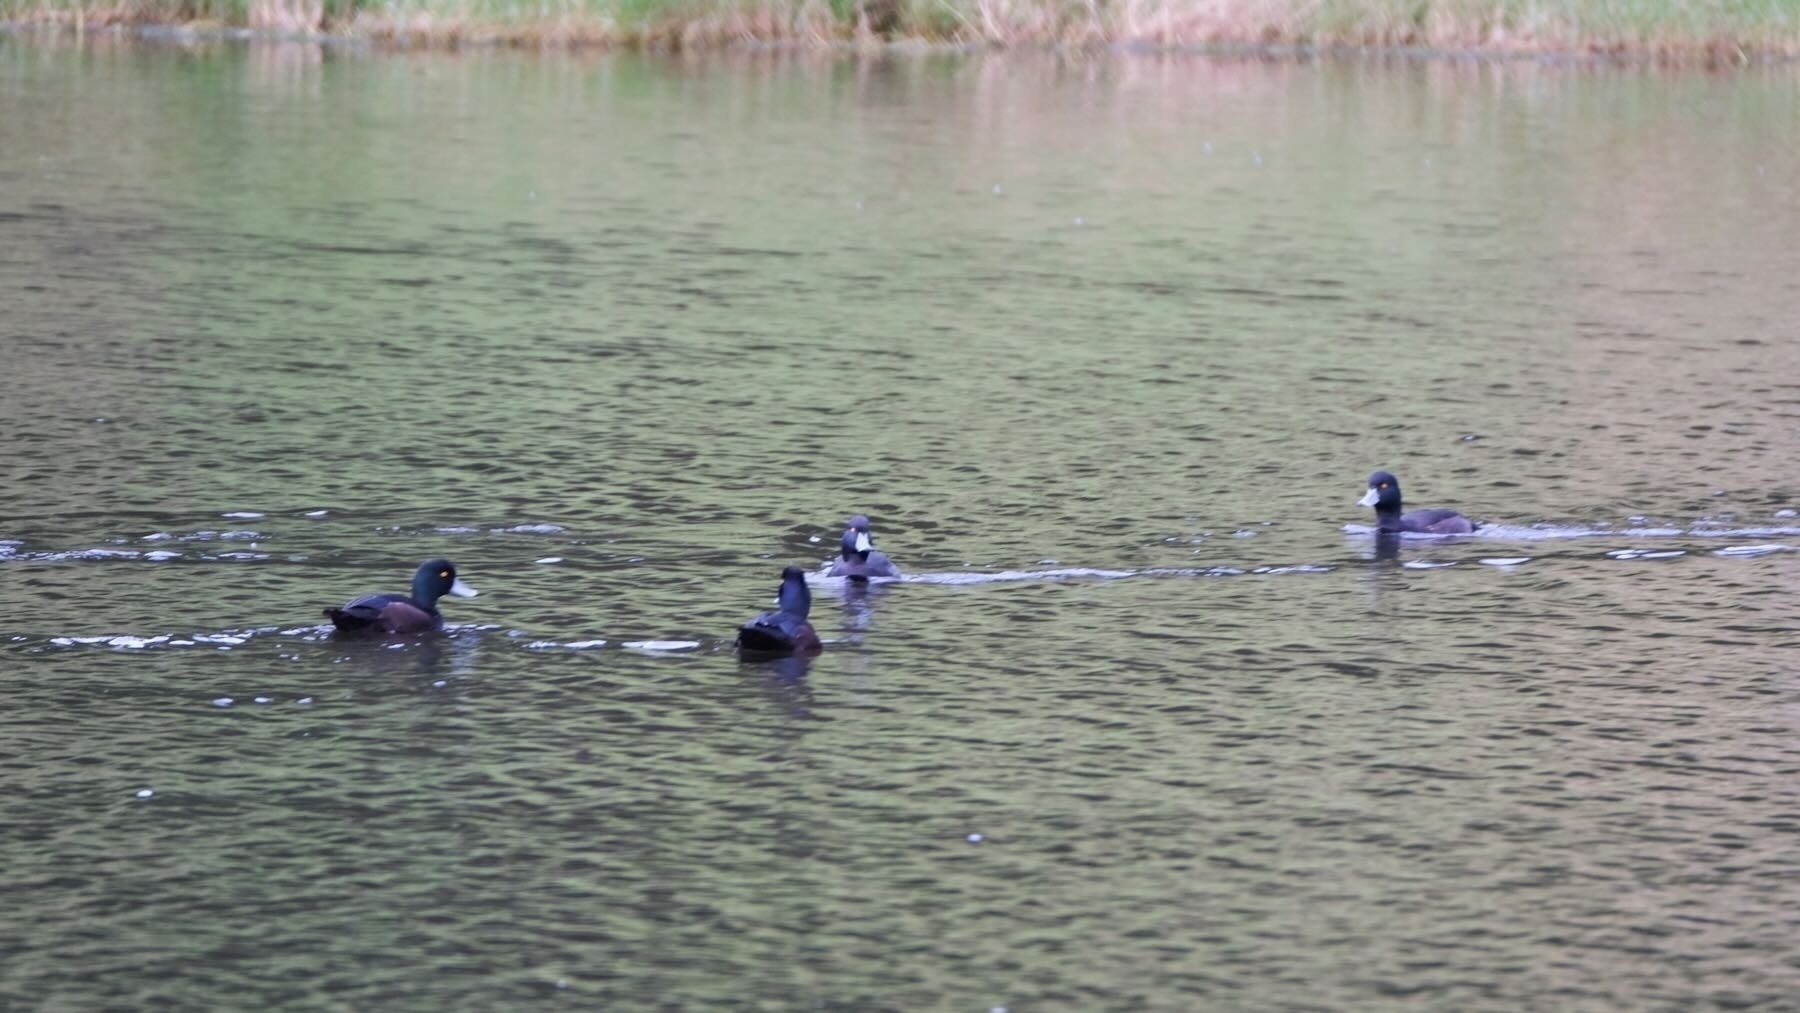 4 New Zealand scaup on a small lake, with a grouping of 3 facing one another, and one heading towards them. 